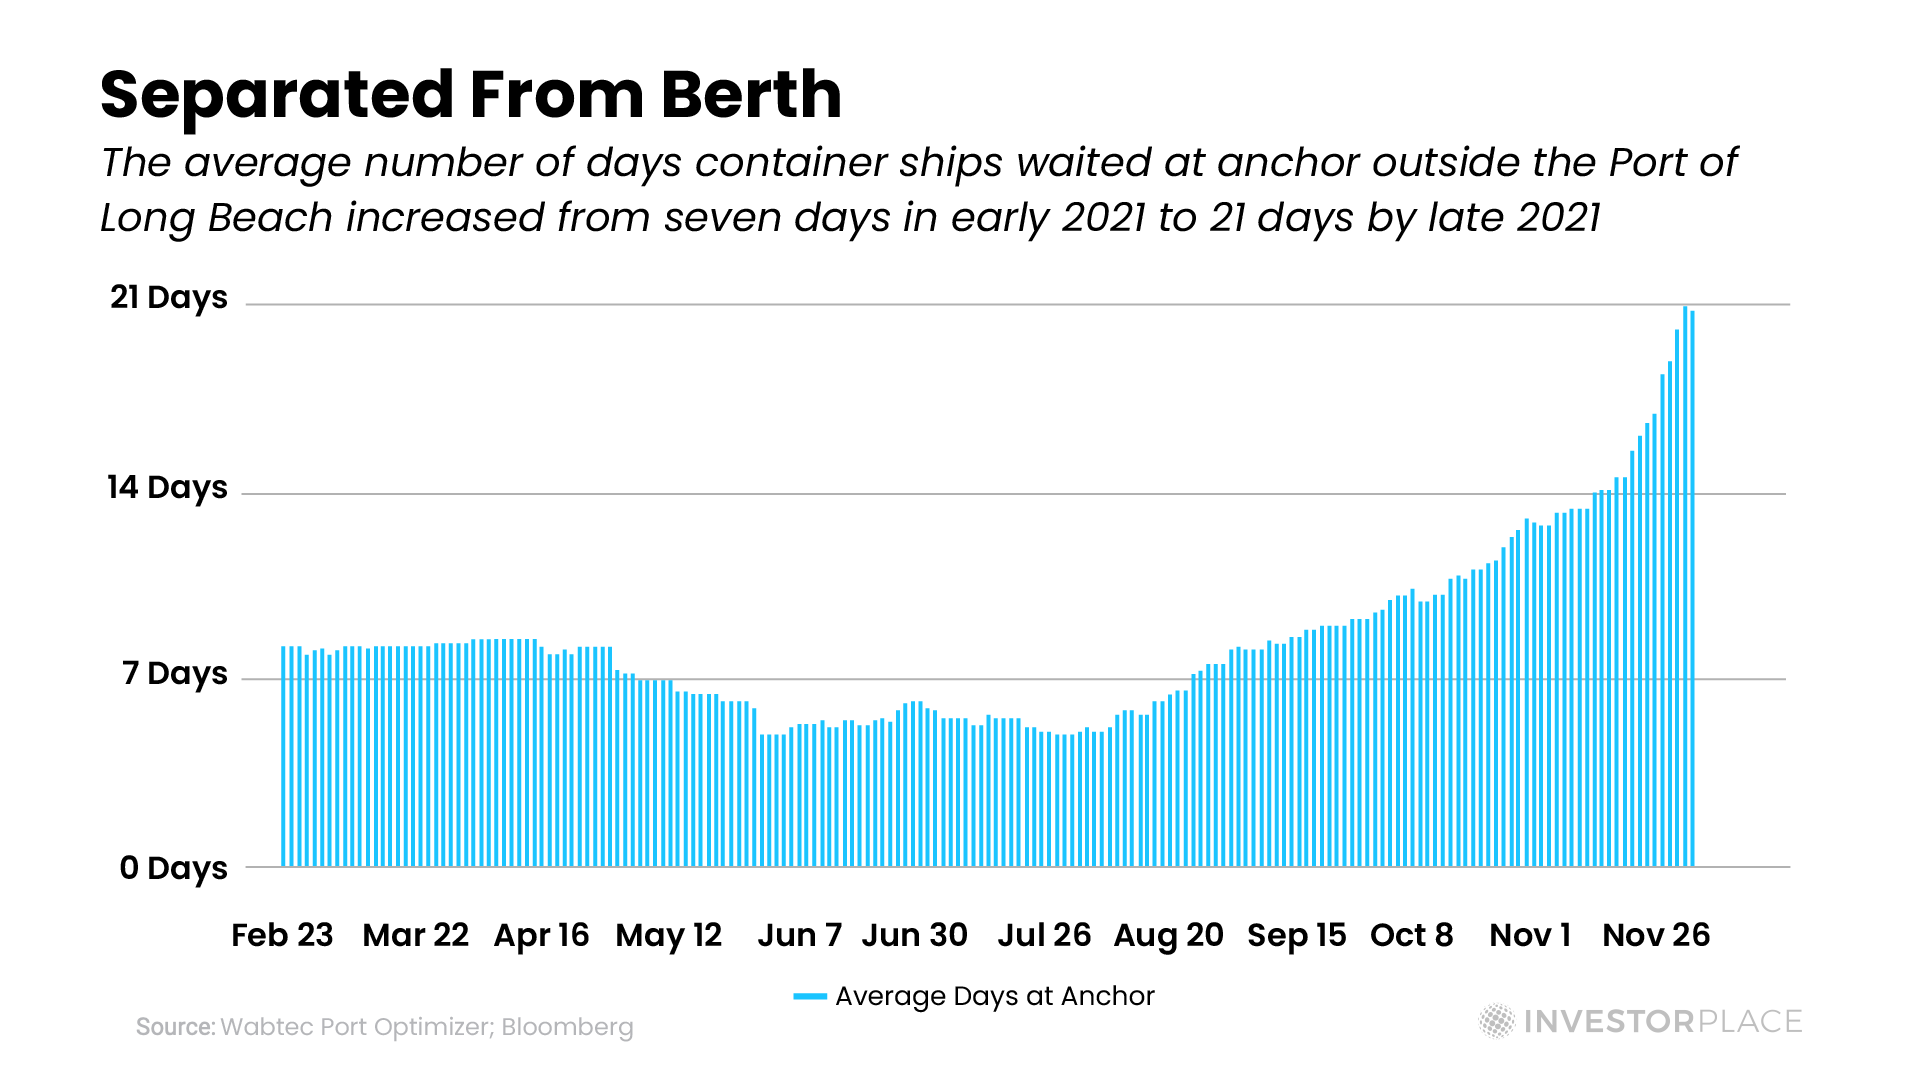 A chart that shows the average number of days container ships waited at anchor outside the Port of Long Beach; it increased from 7 days in early 2021 to 21 days by late 2021